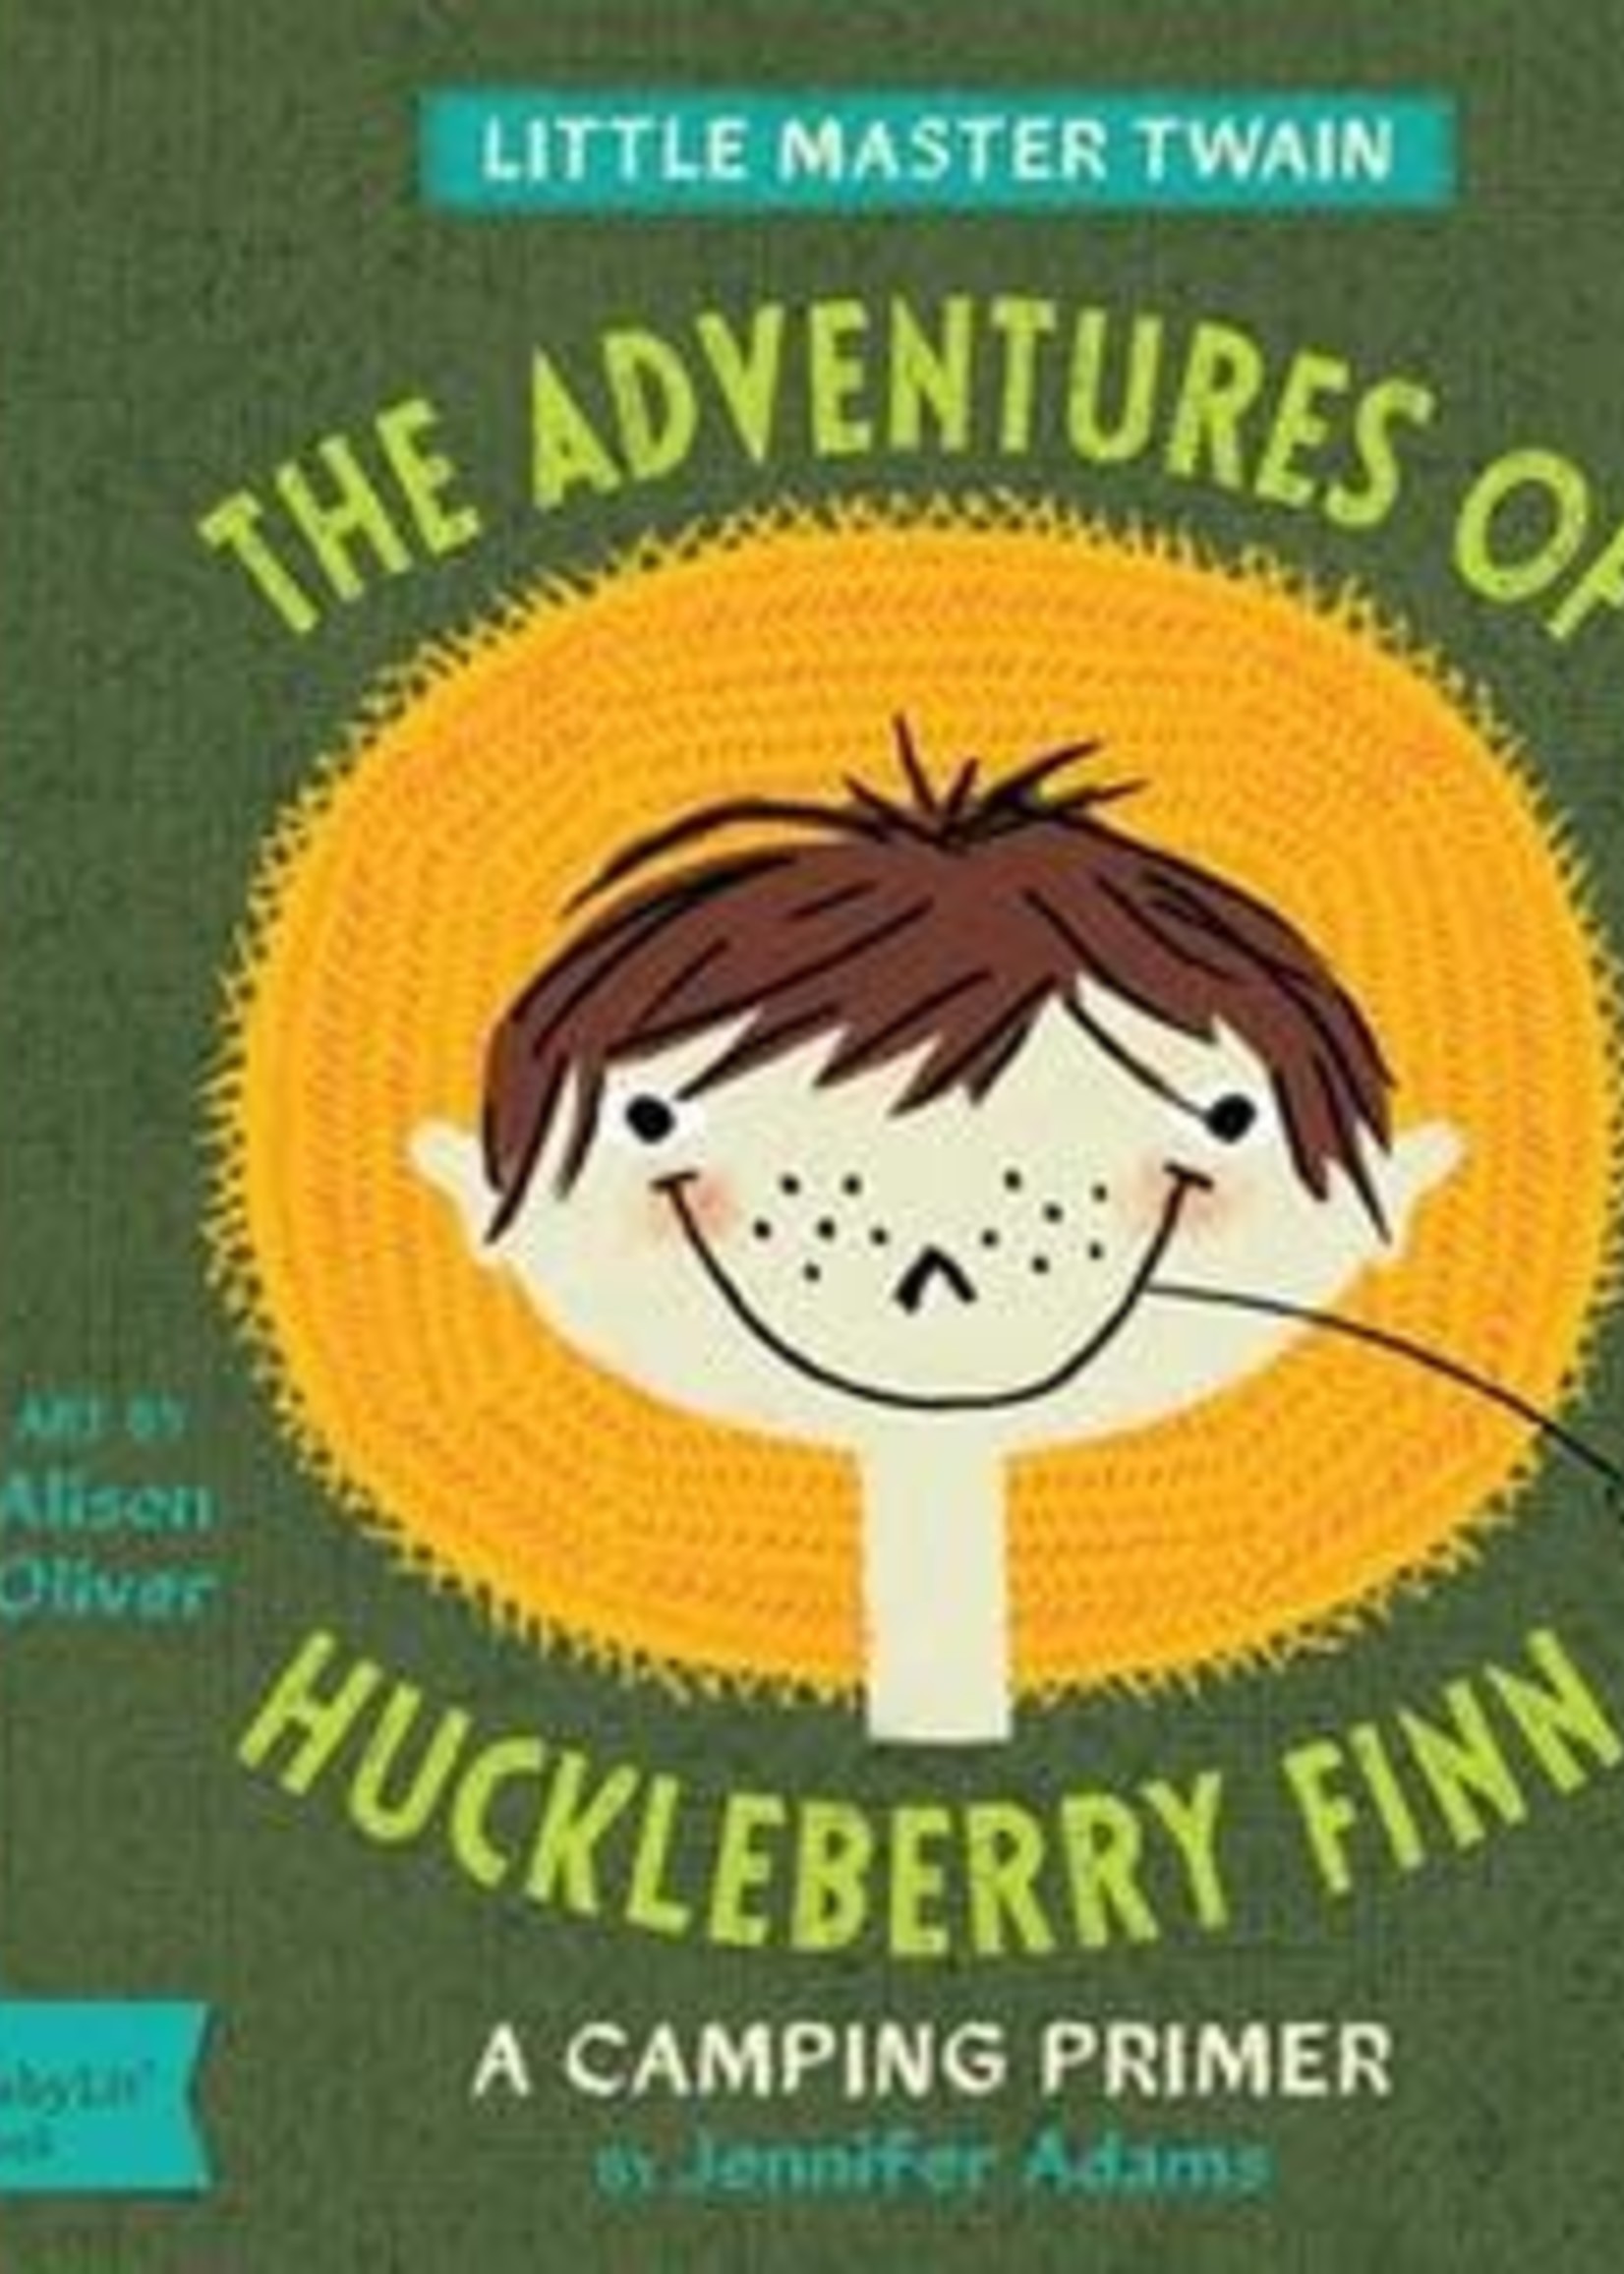 The Adventures of Huckleberry Finn: A BabyLit® Camping Primer by Jennifer Adams,  Alison Oliver